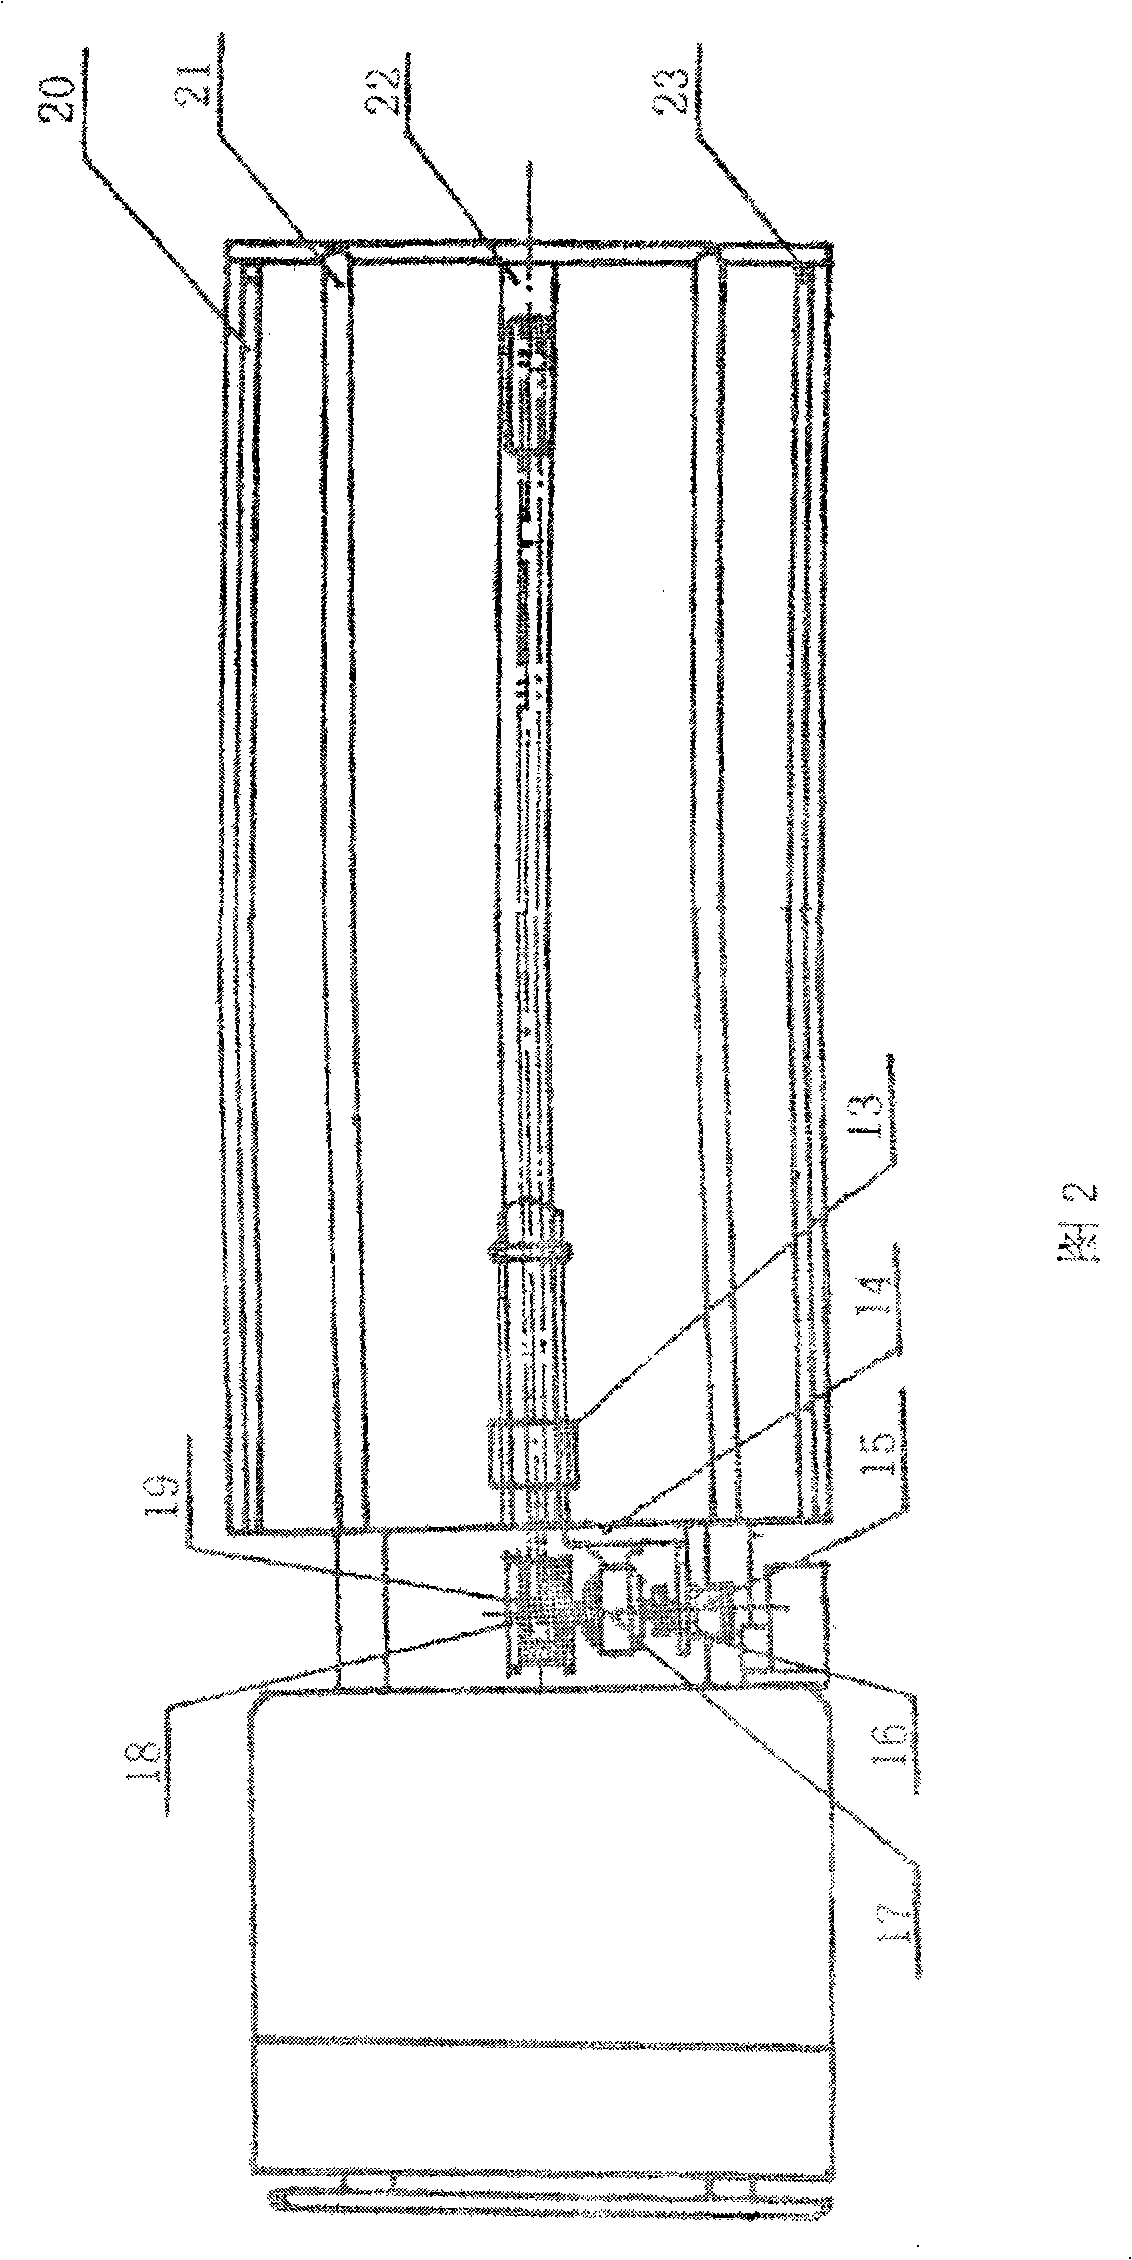 Tank-carrying hydraulic automatic discharging vehicle